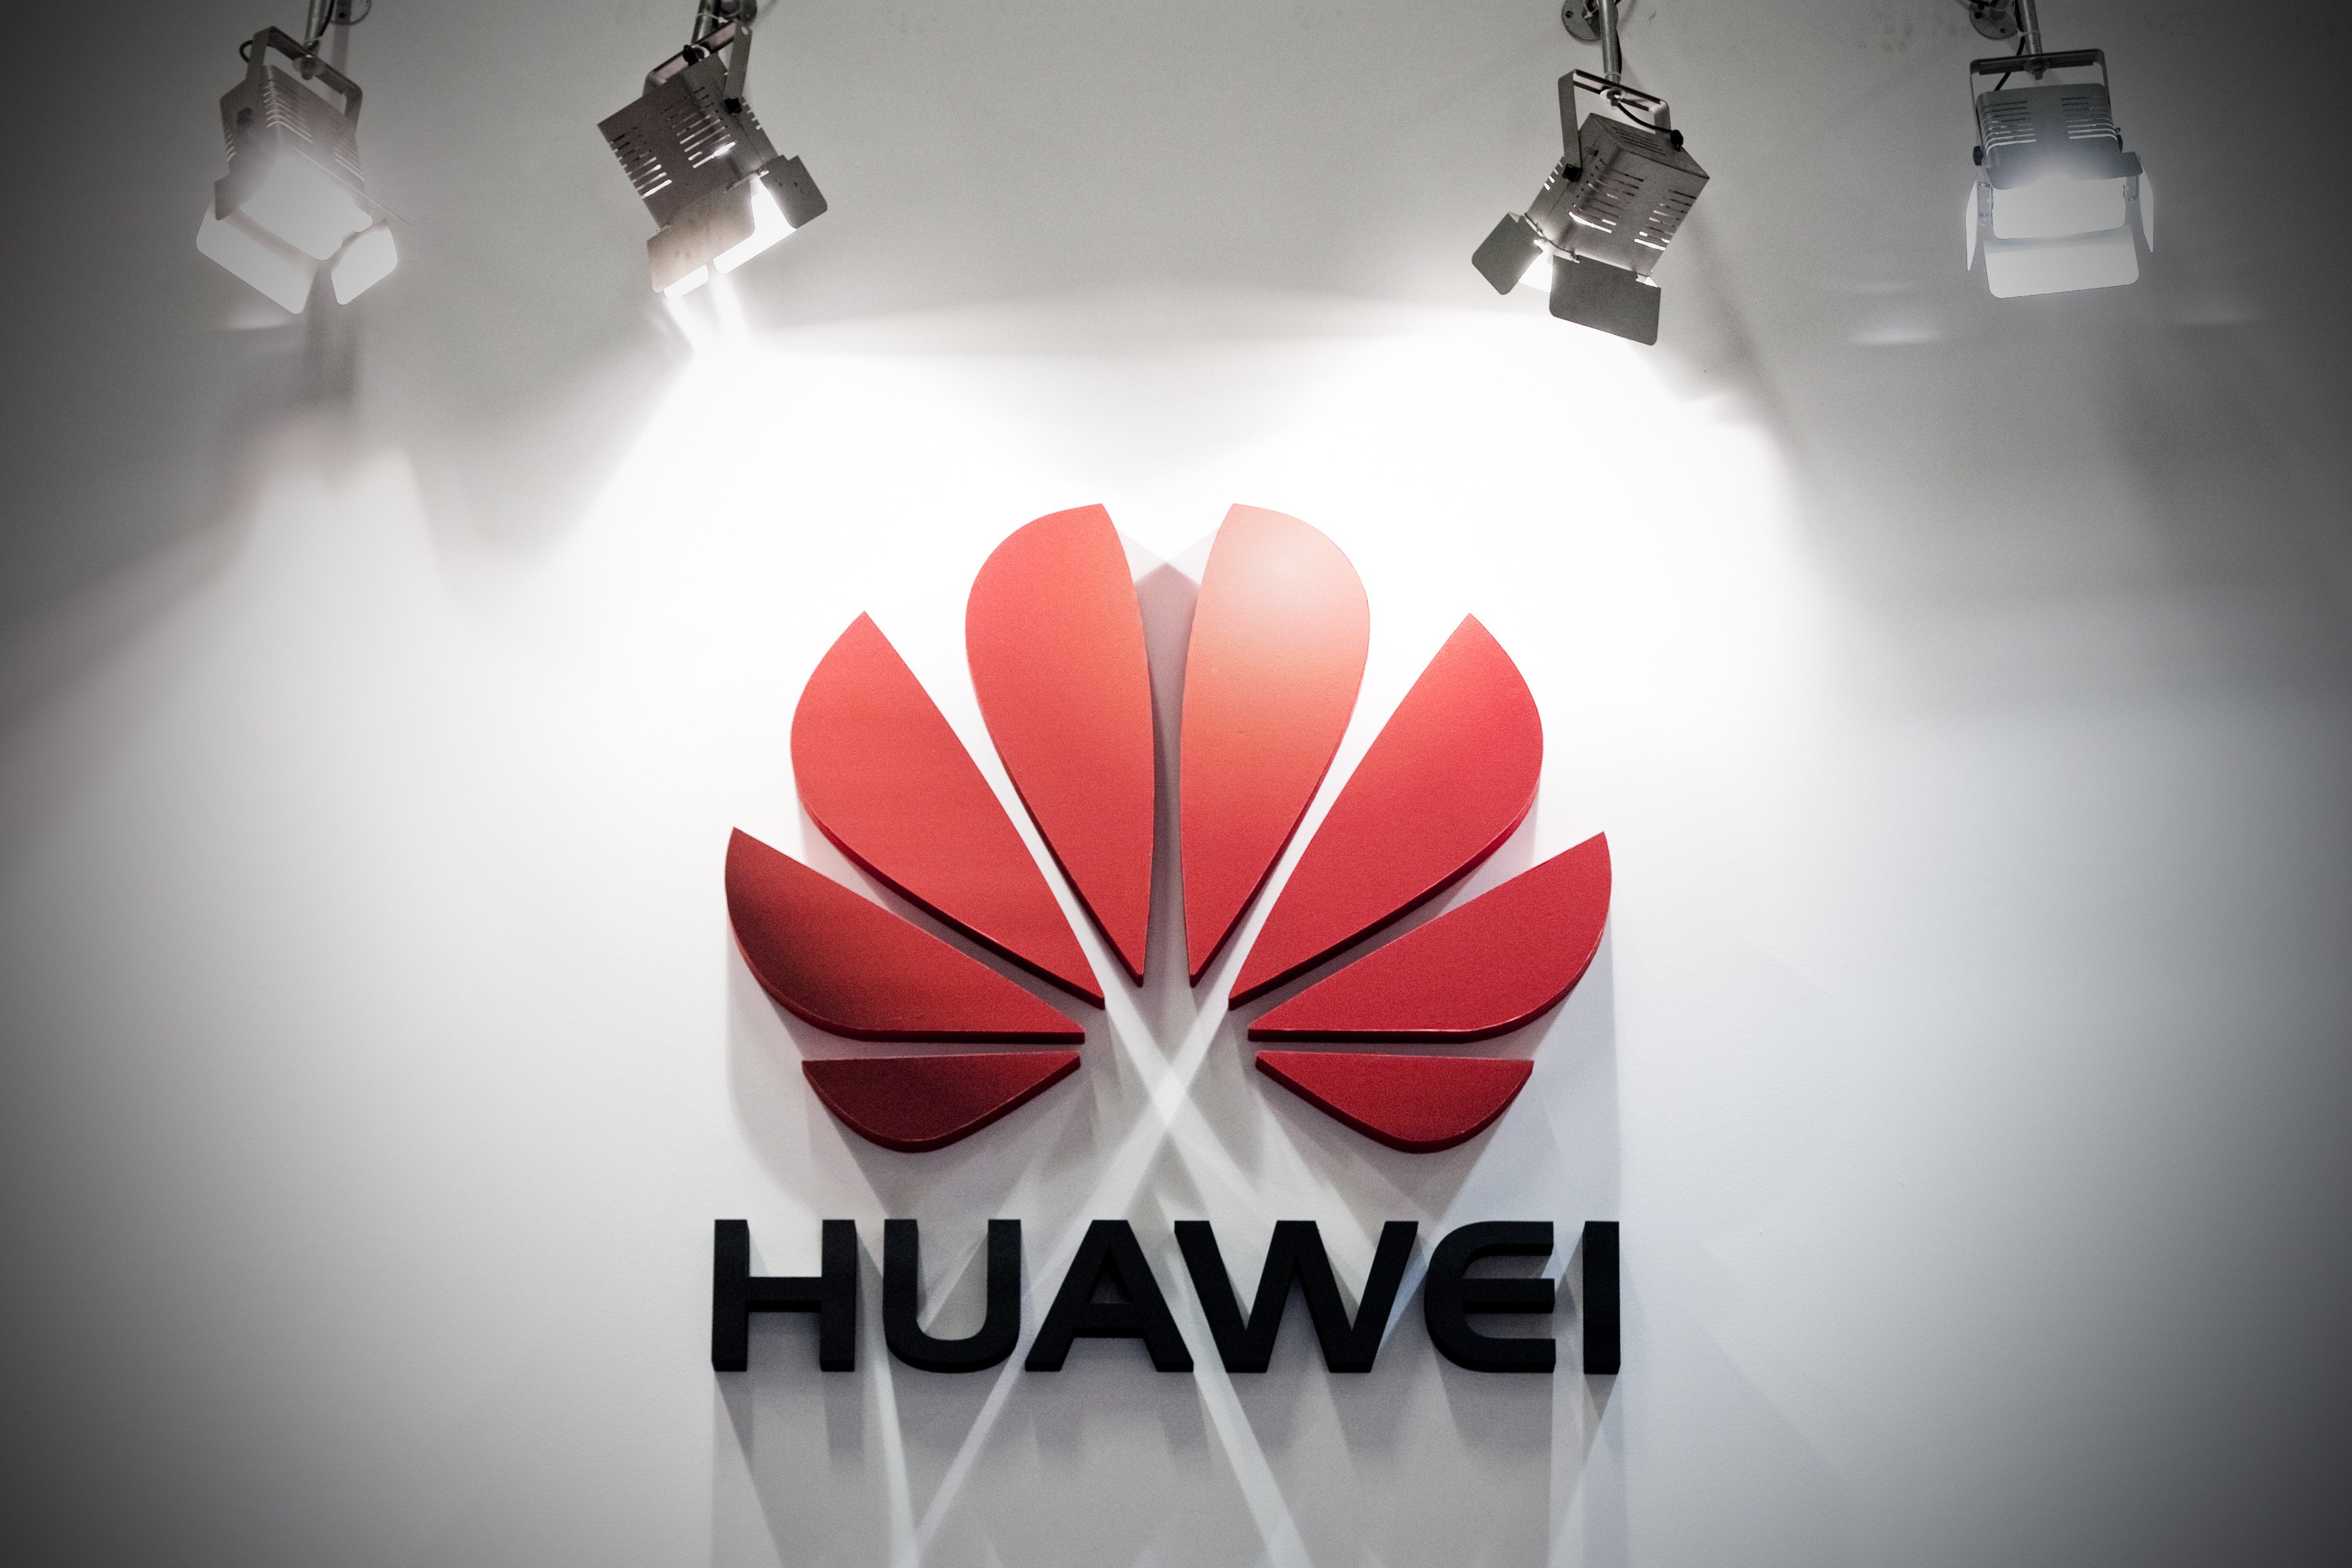 The Huawei Technologies Co logo is seen at the International Consumer Electronics Fair in Berlin in September 2012. Photo: dpa